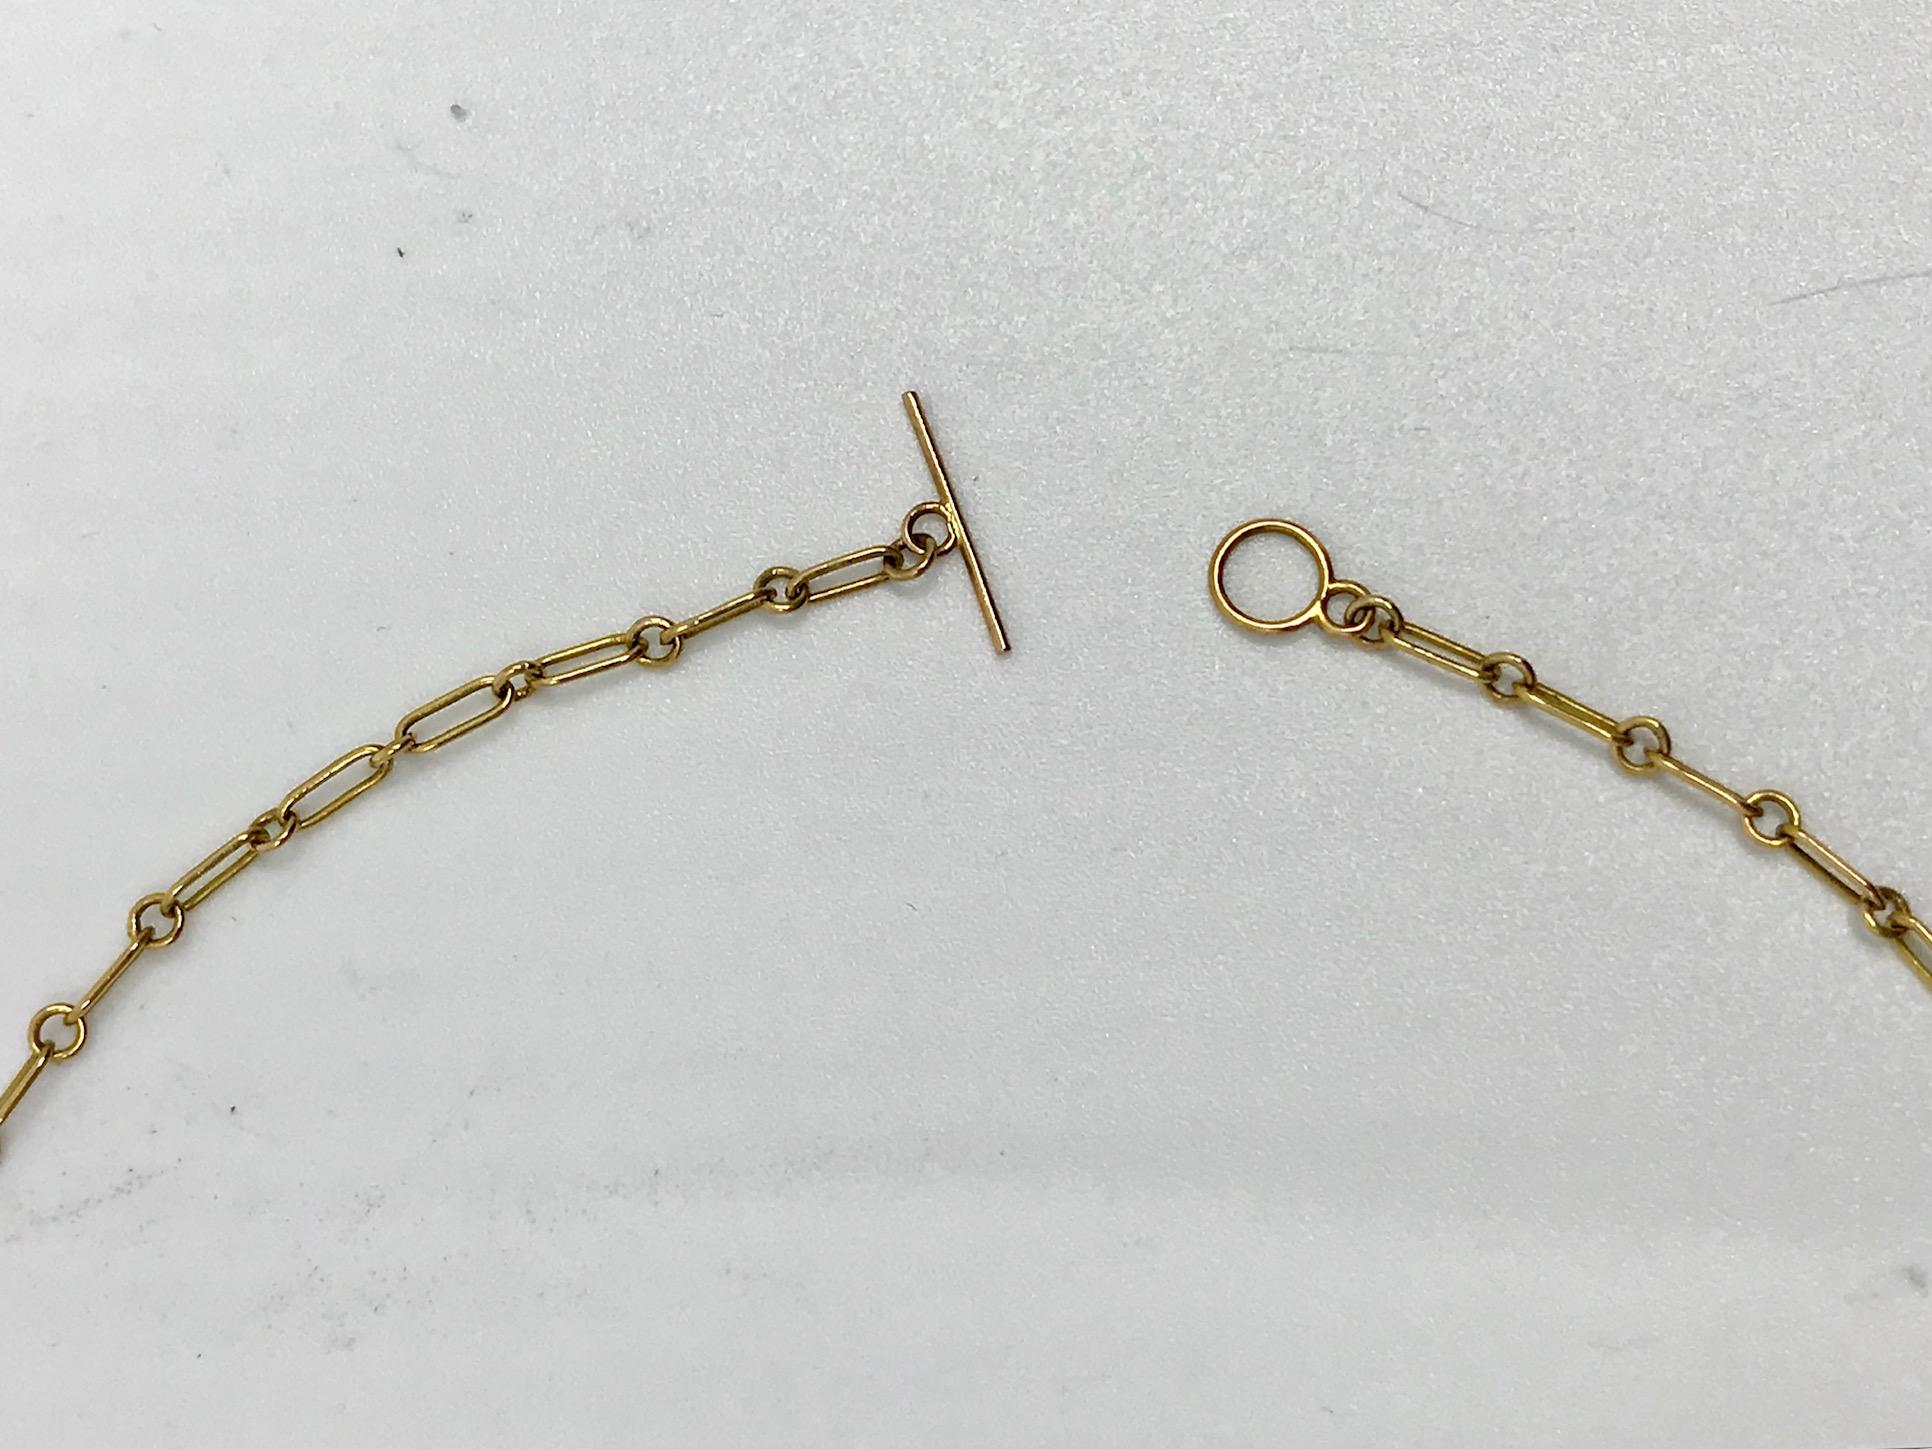 Very Rare Georg Jensen 18 Karat Gold Pendant #49 and Matching Brooch #59 In Good Condition For Sale In Hellerup, DK